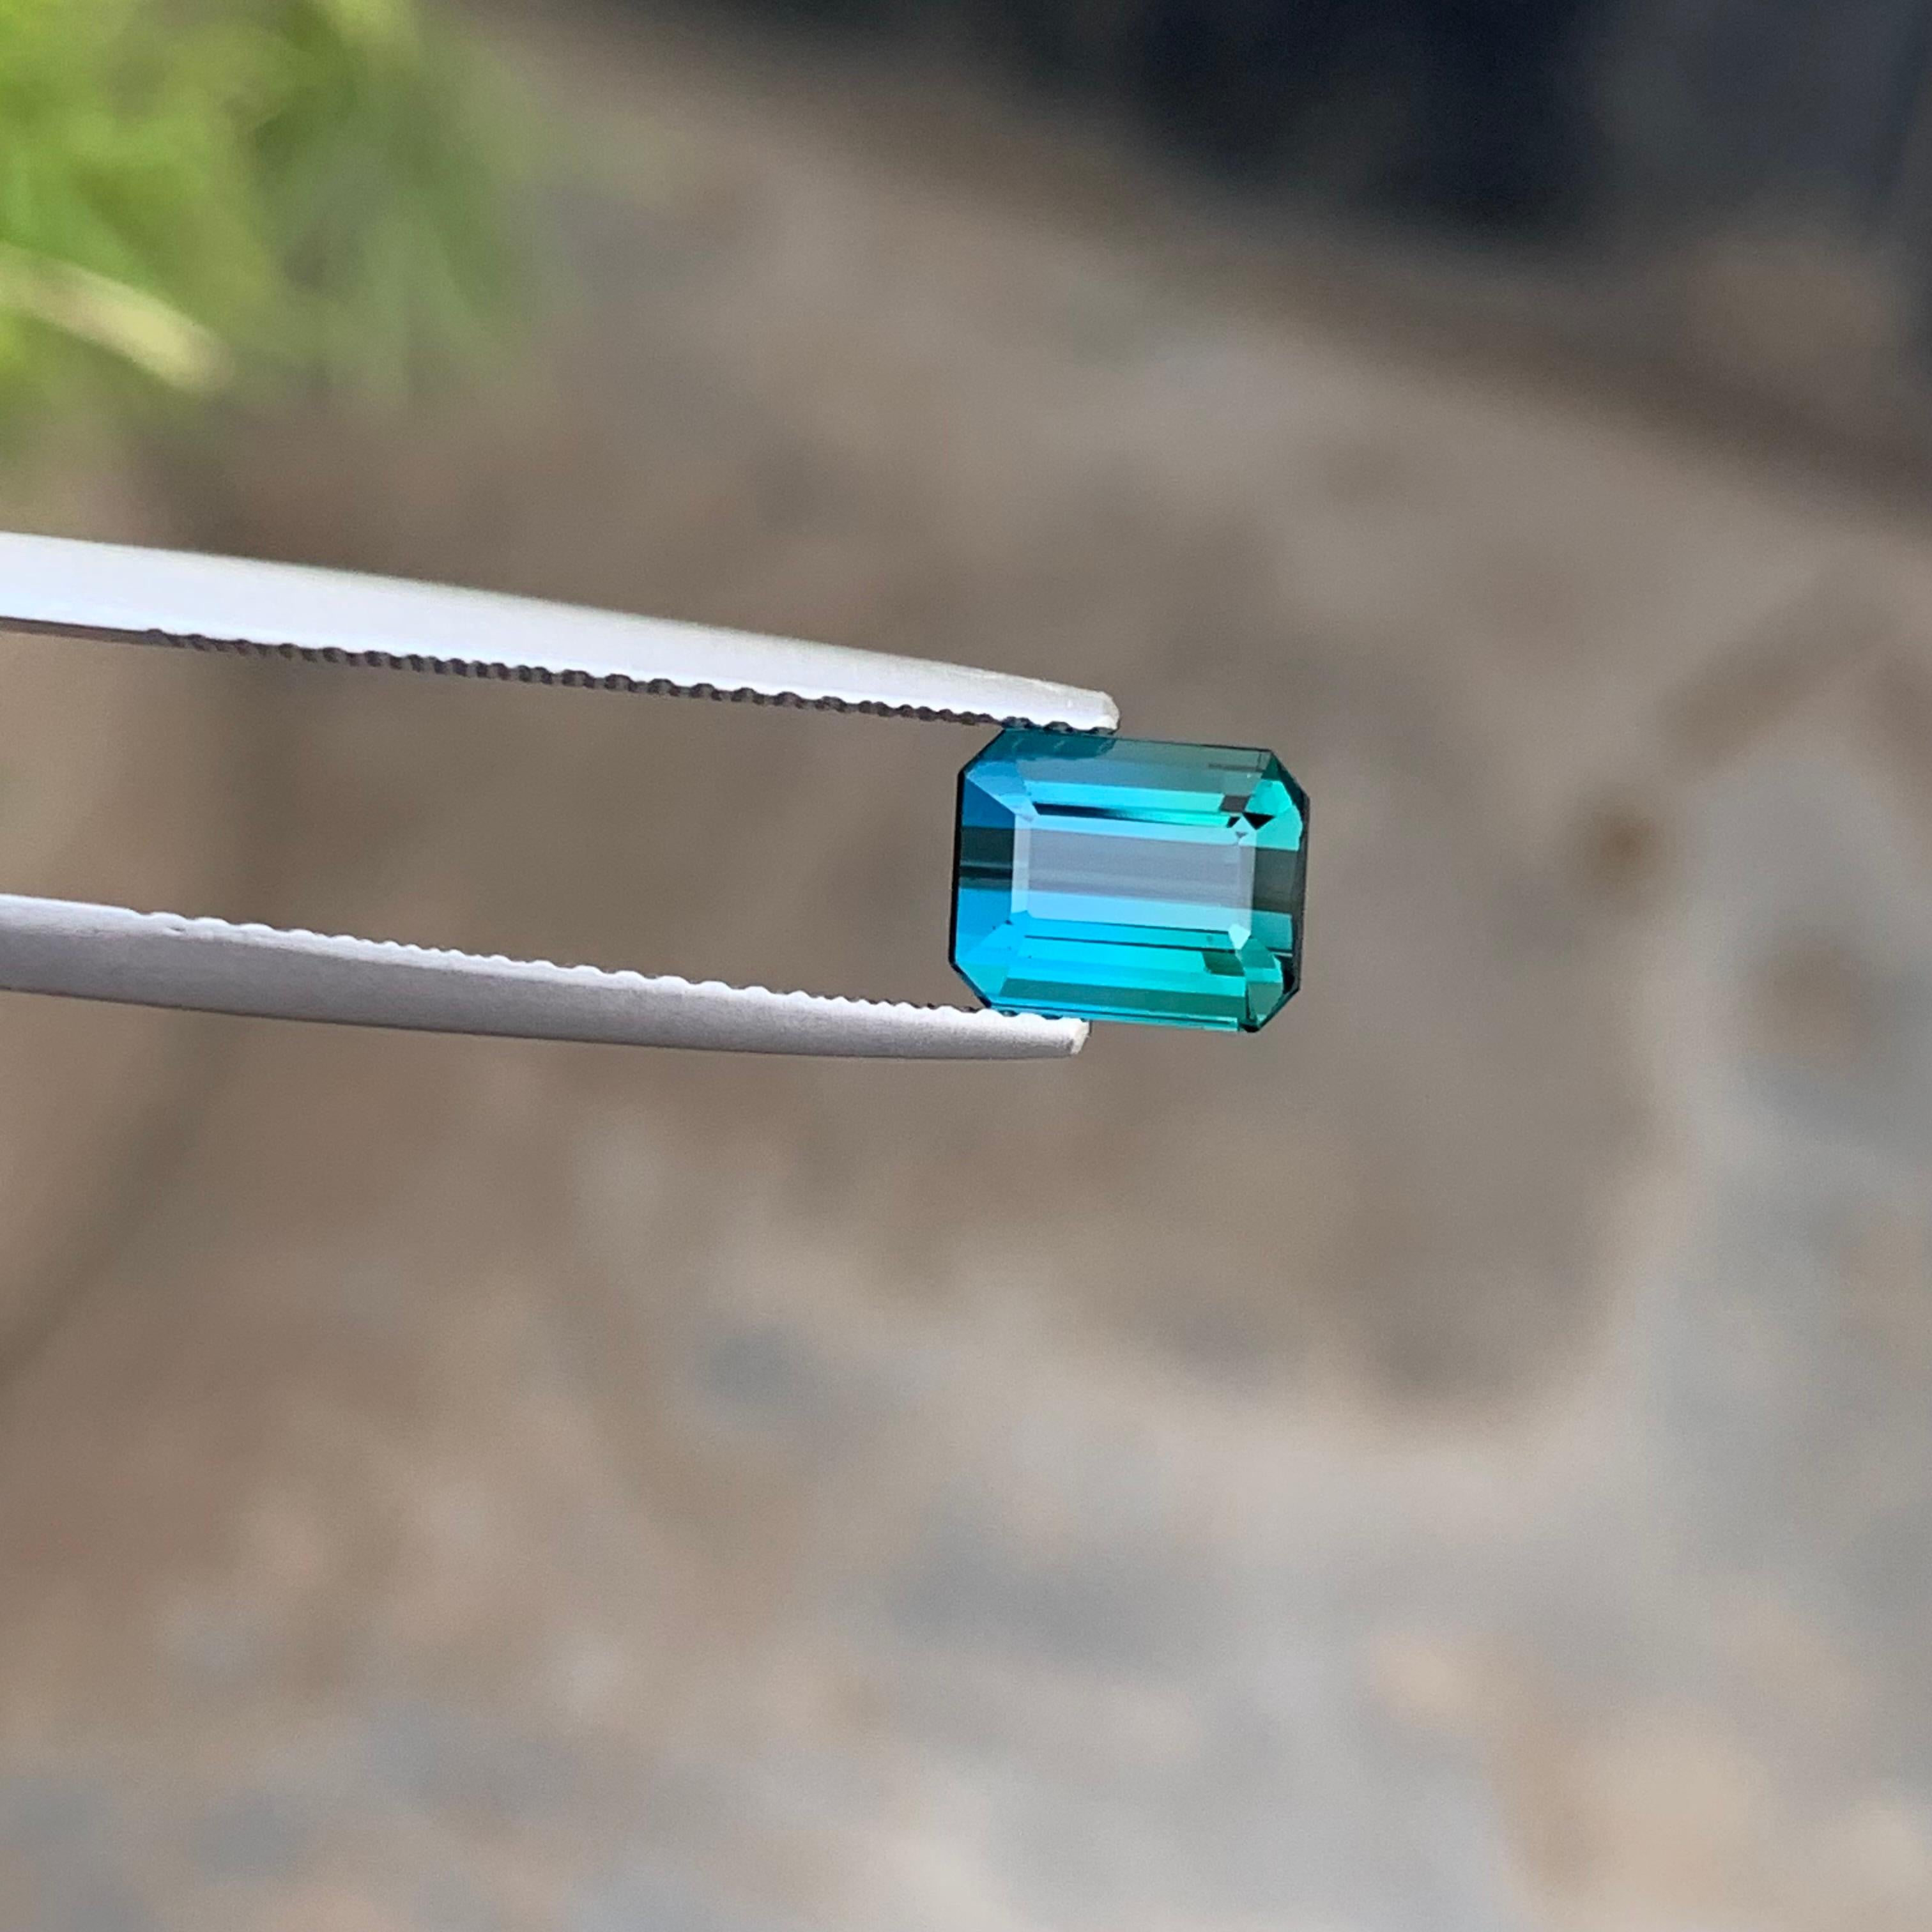 Emerald Cut 1.65 Carat Natural Blue Indicolite Tourmaline Emerald Shape from Afghan Mine For Sale